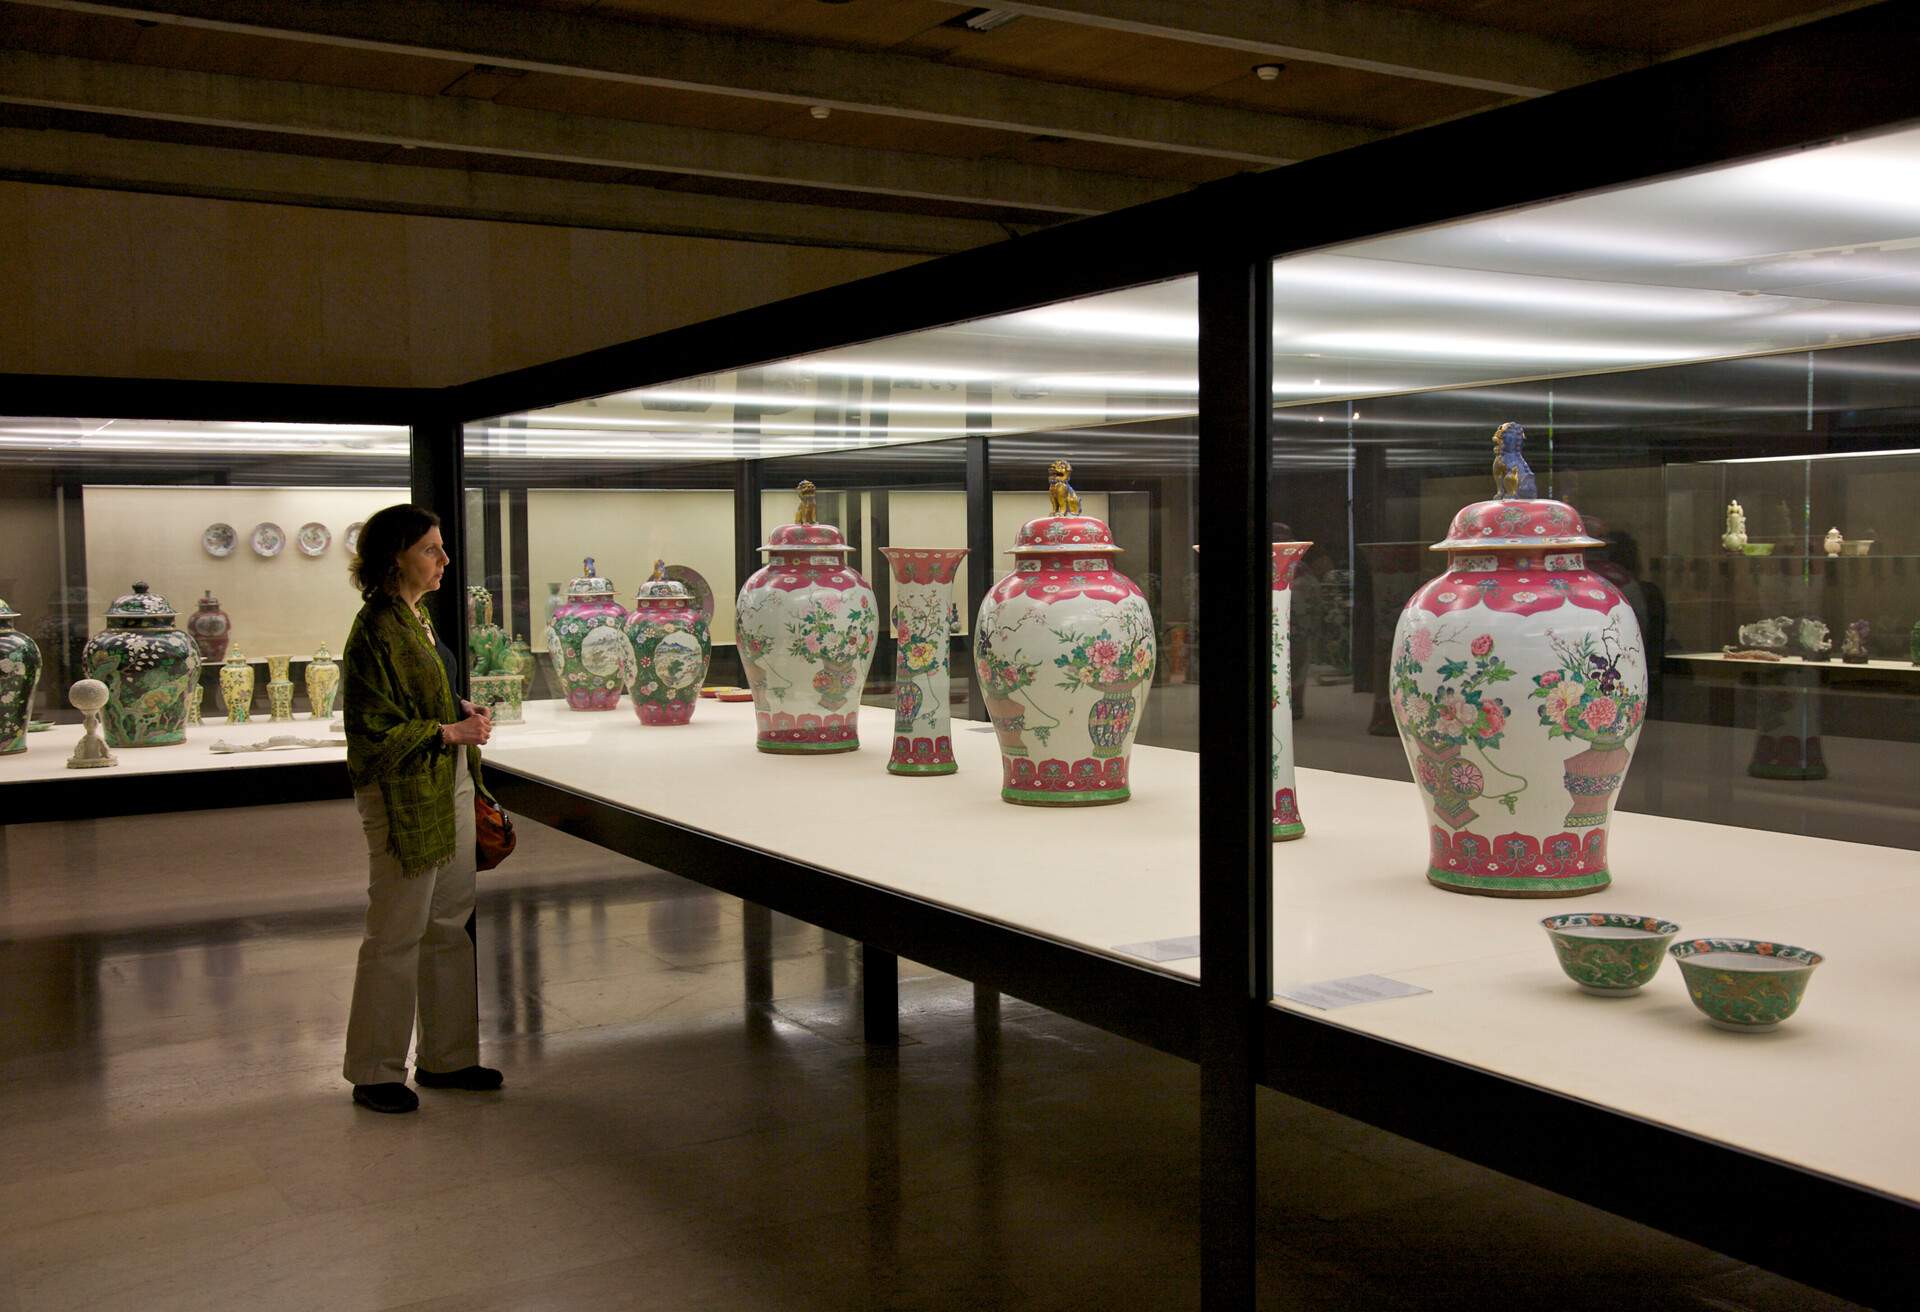 A mature woman looking at antique ceramic vases enclosed in a glass display case.